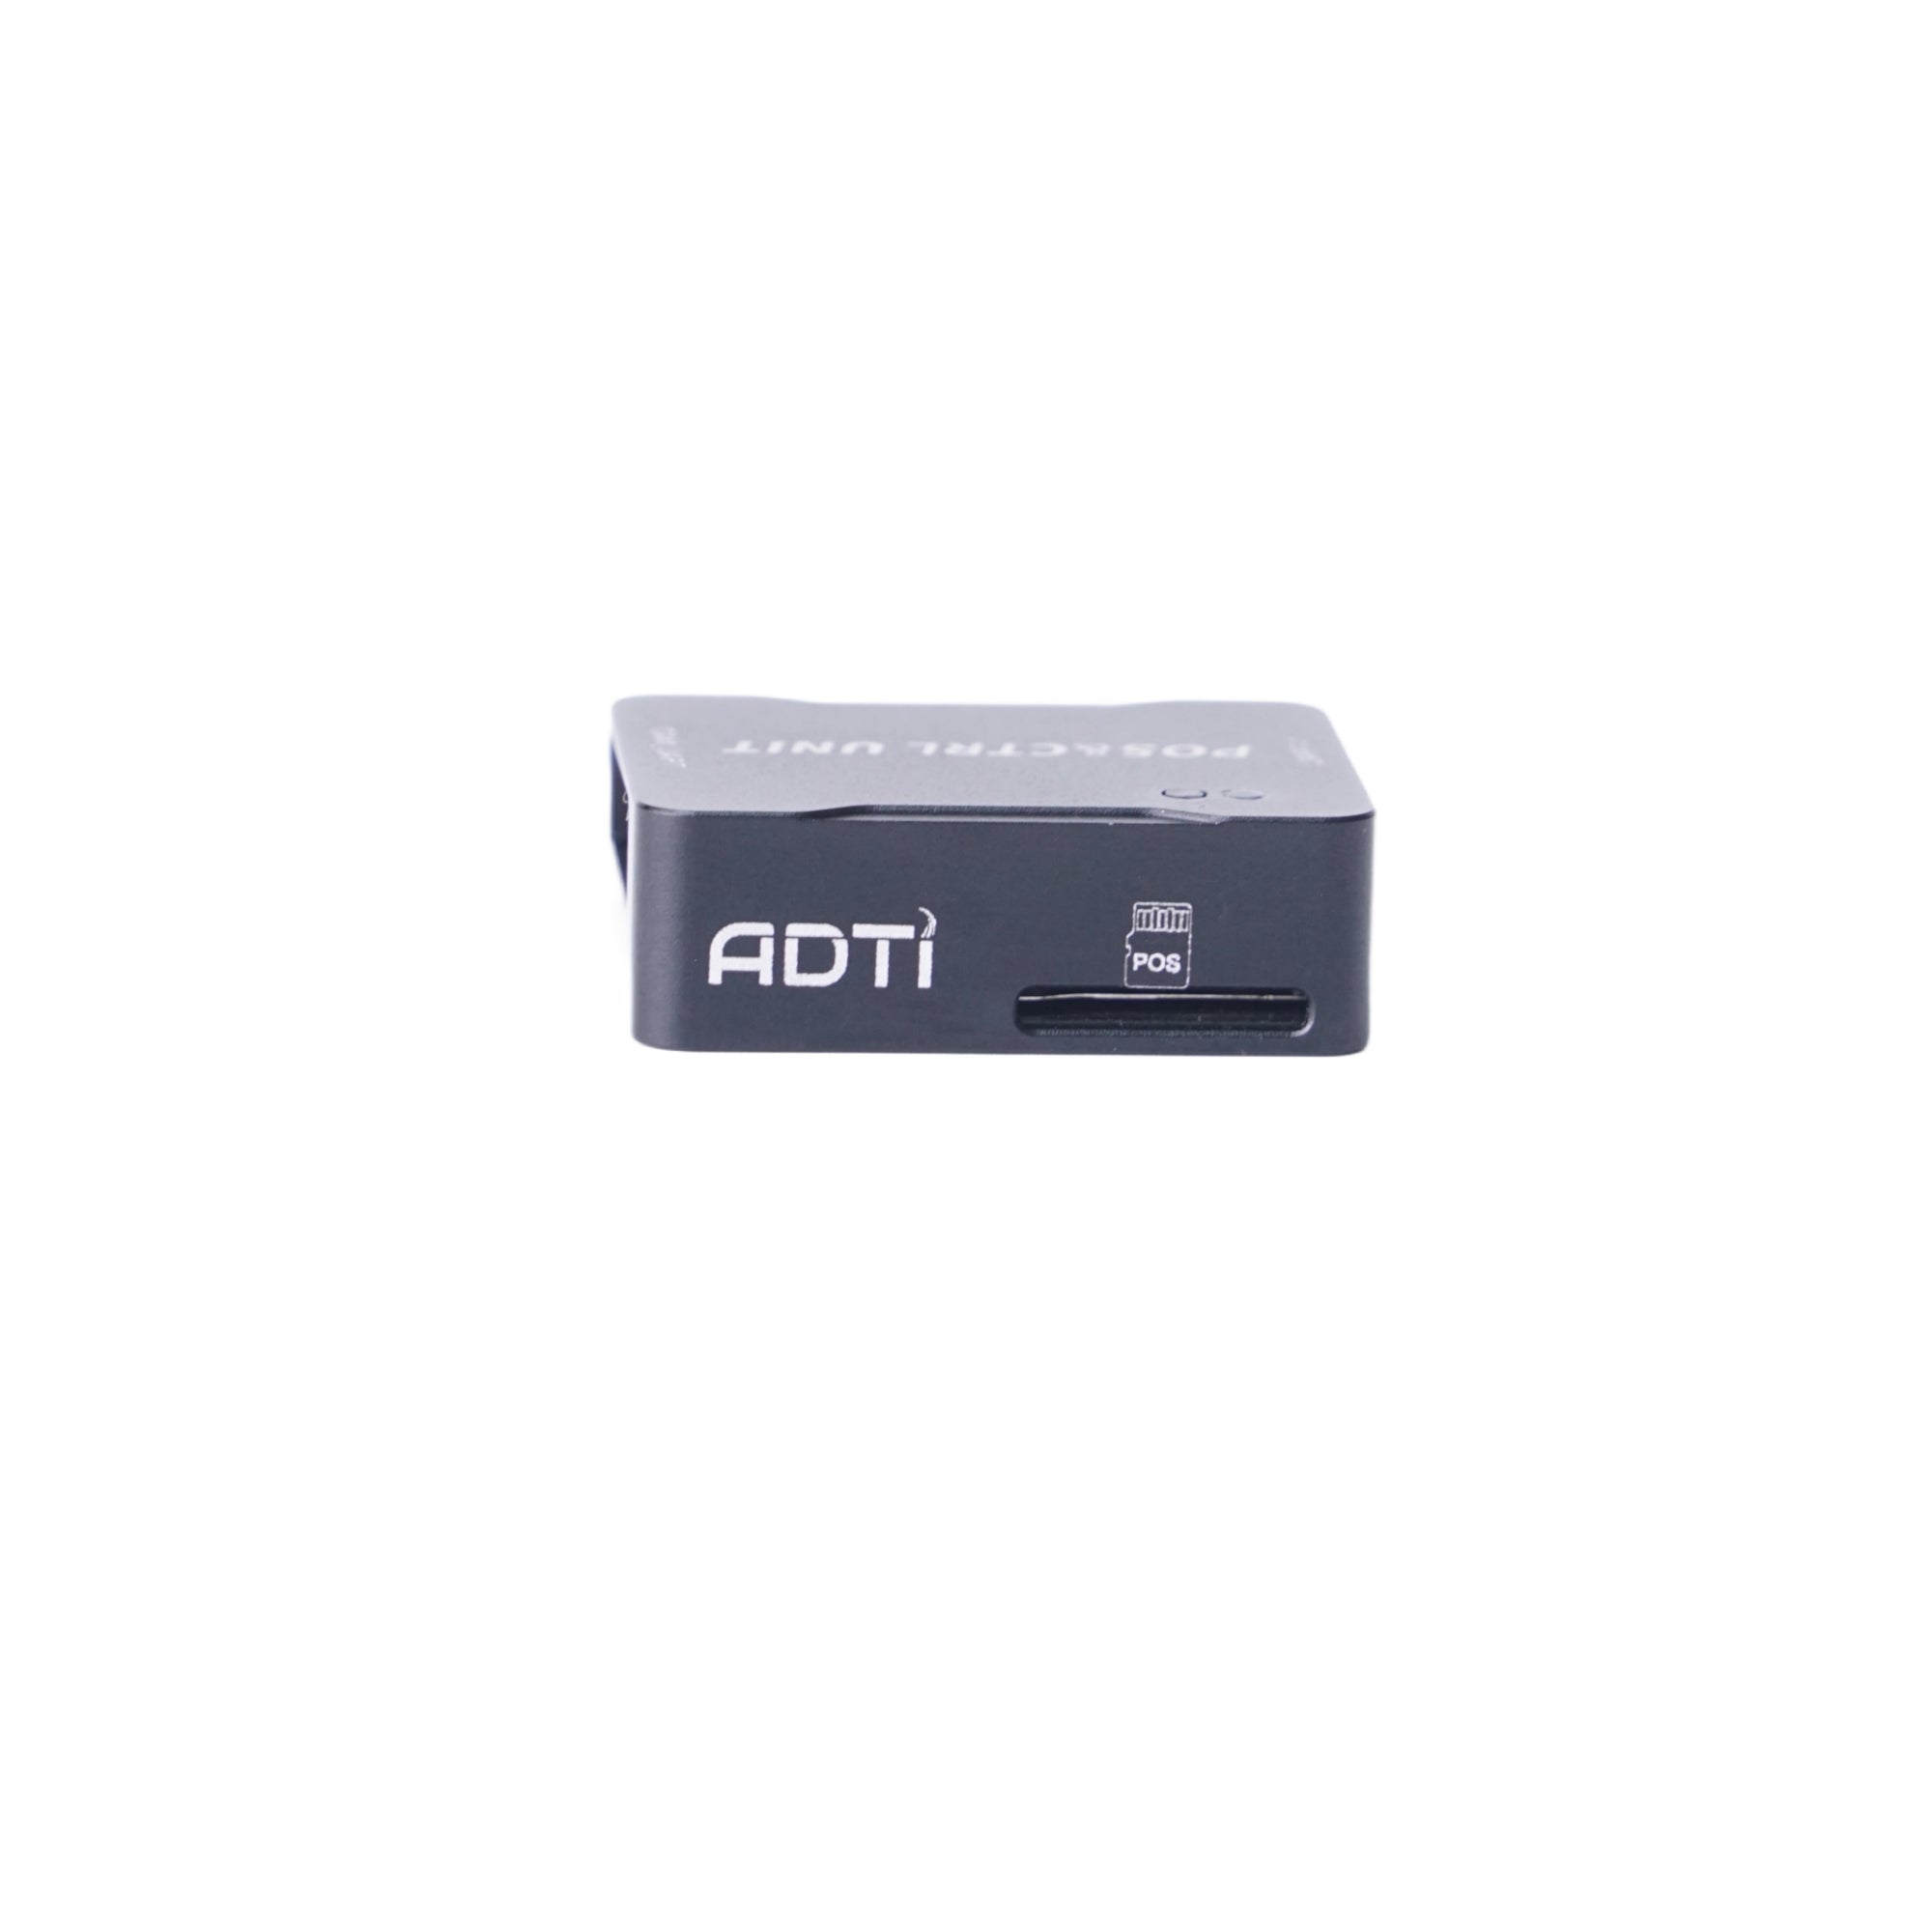 ADTI Camera POS & CTRL Units for Direct Geotagging - Unmanned RC